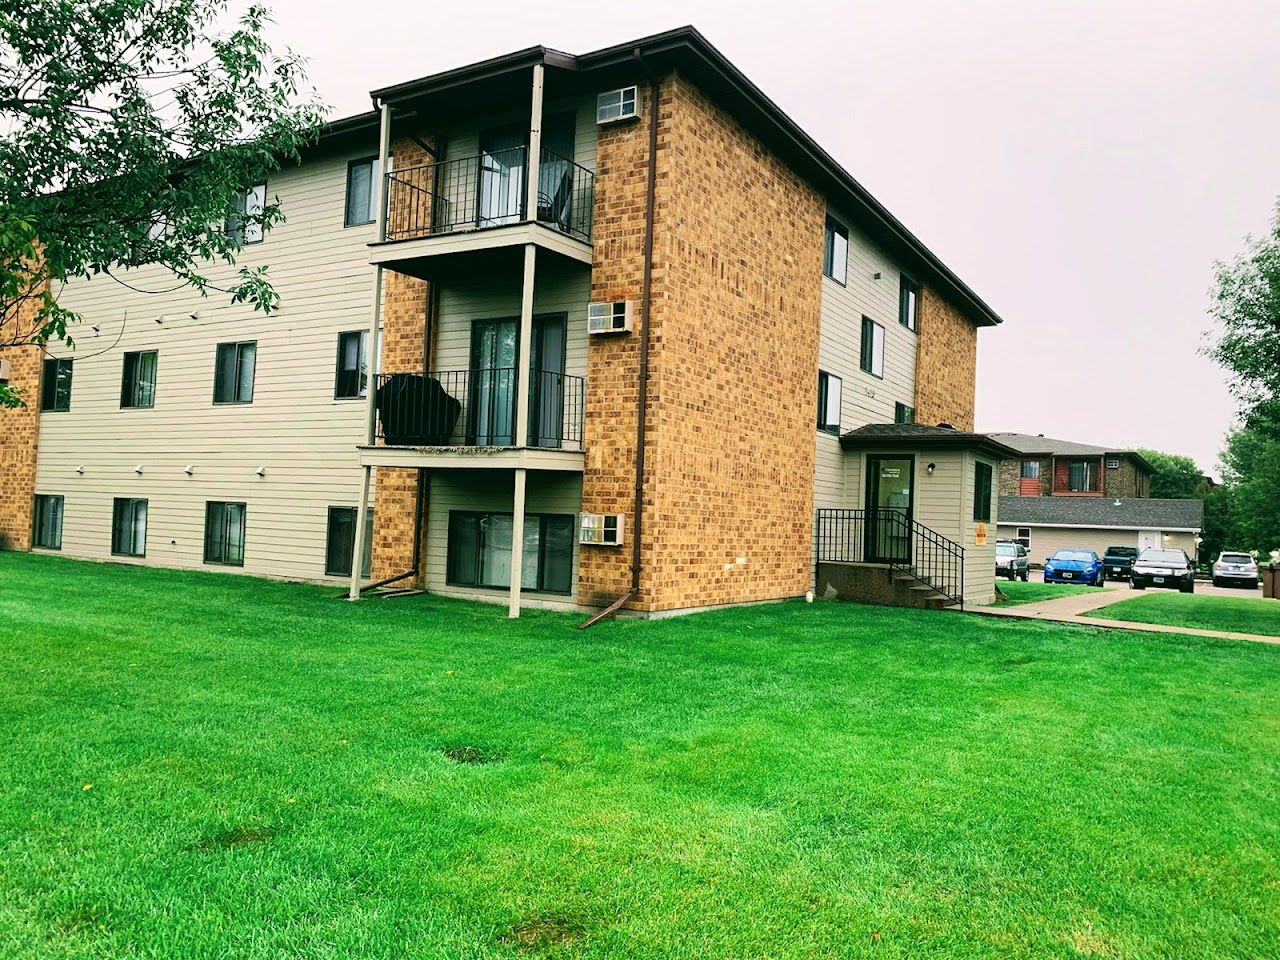 Photo of PRAIRIE WEST APTS III. Affordable housing located at 1415 14TH AVE E WEST FARGO, ND 58078